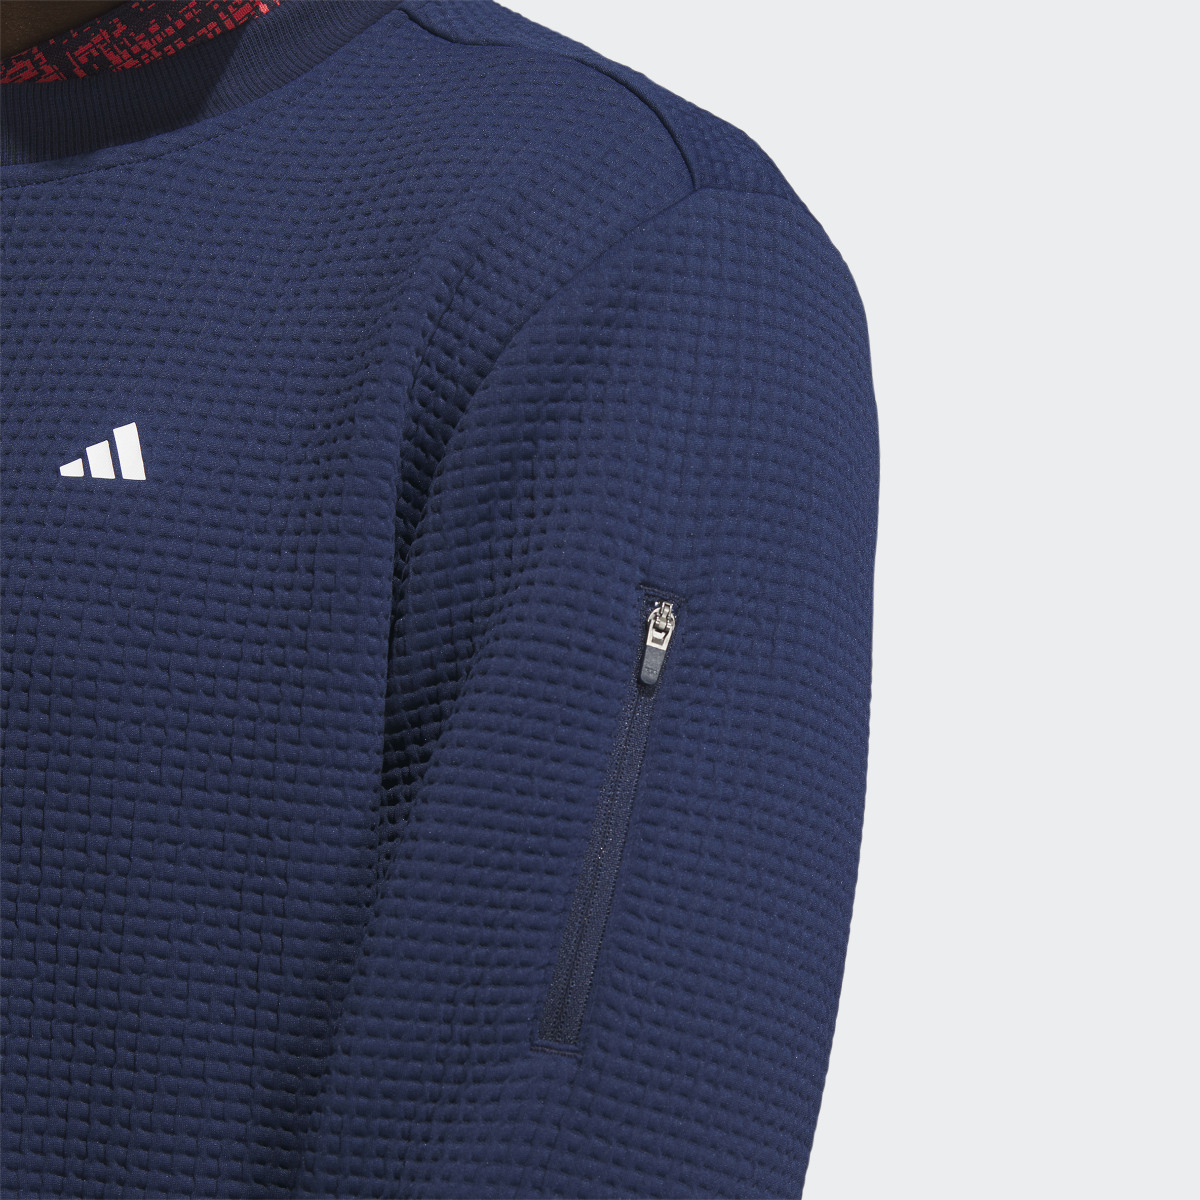 Adidas Ultimate365 Tour COLD.RDY Crewneck Pullover. 7